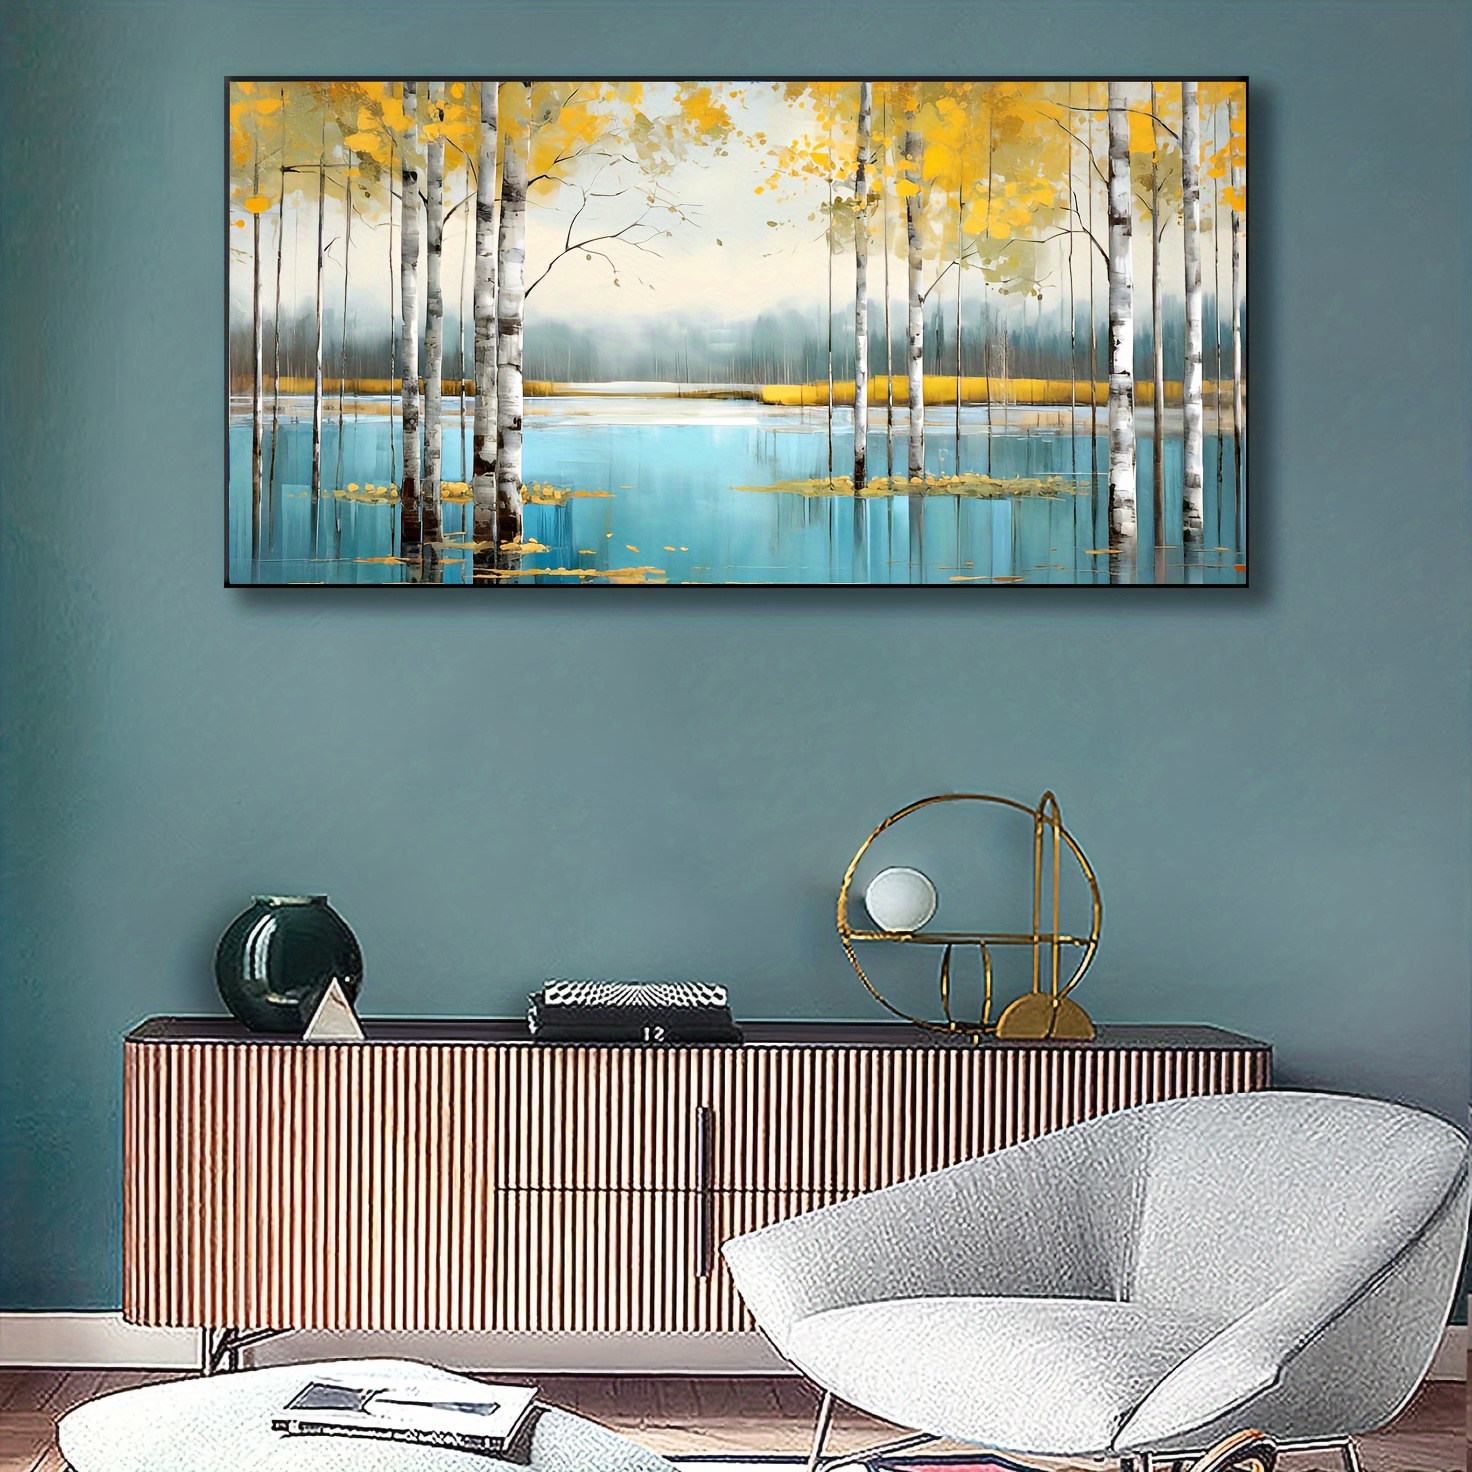 Abstract gold, green and blue landscape painting on canvas